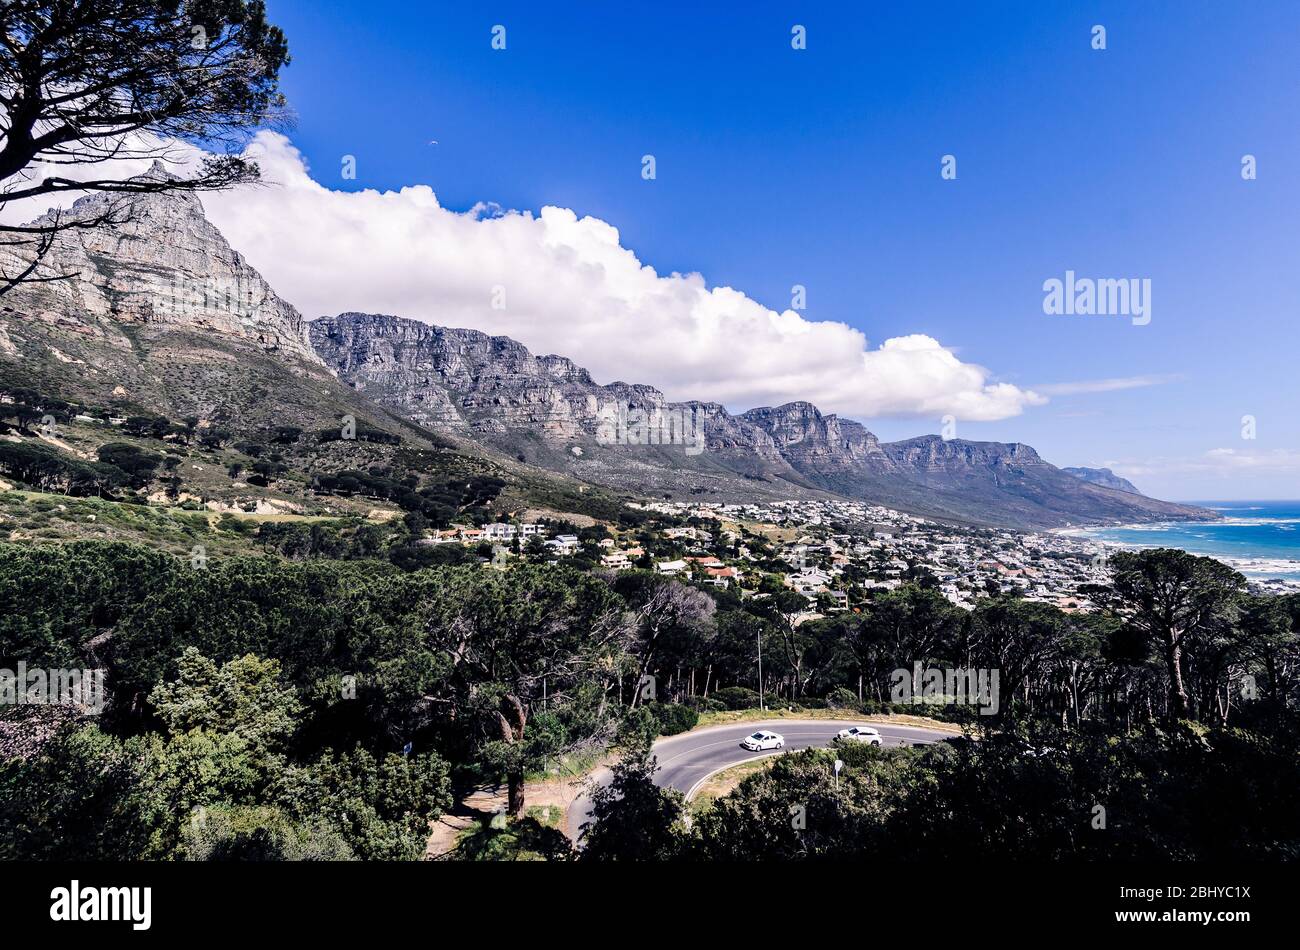 Camps Bay below the twelve apostles peaks on table mountain Cape Town South Africa Stock Photo